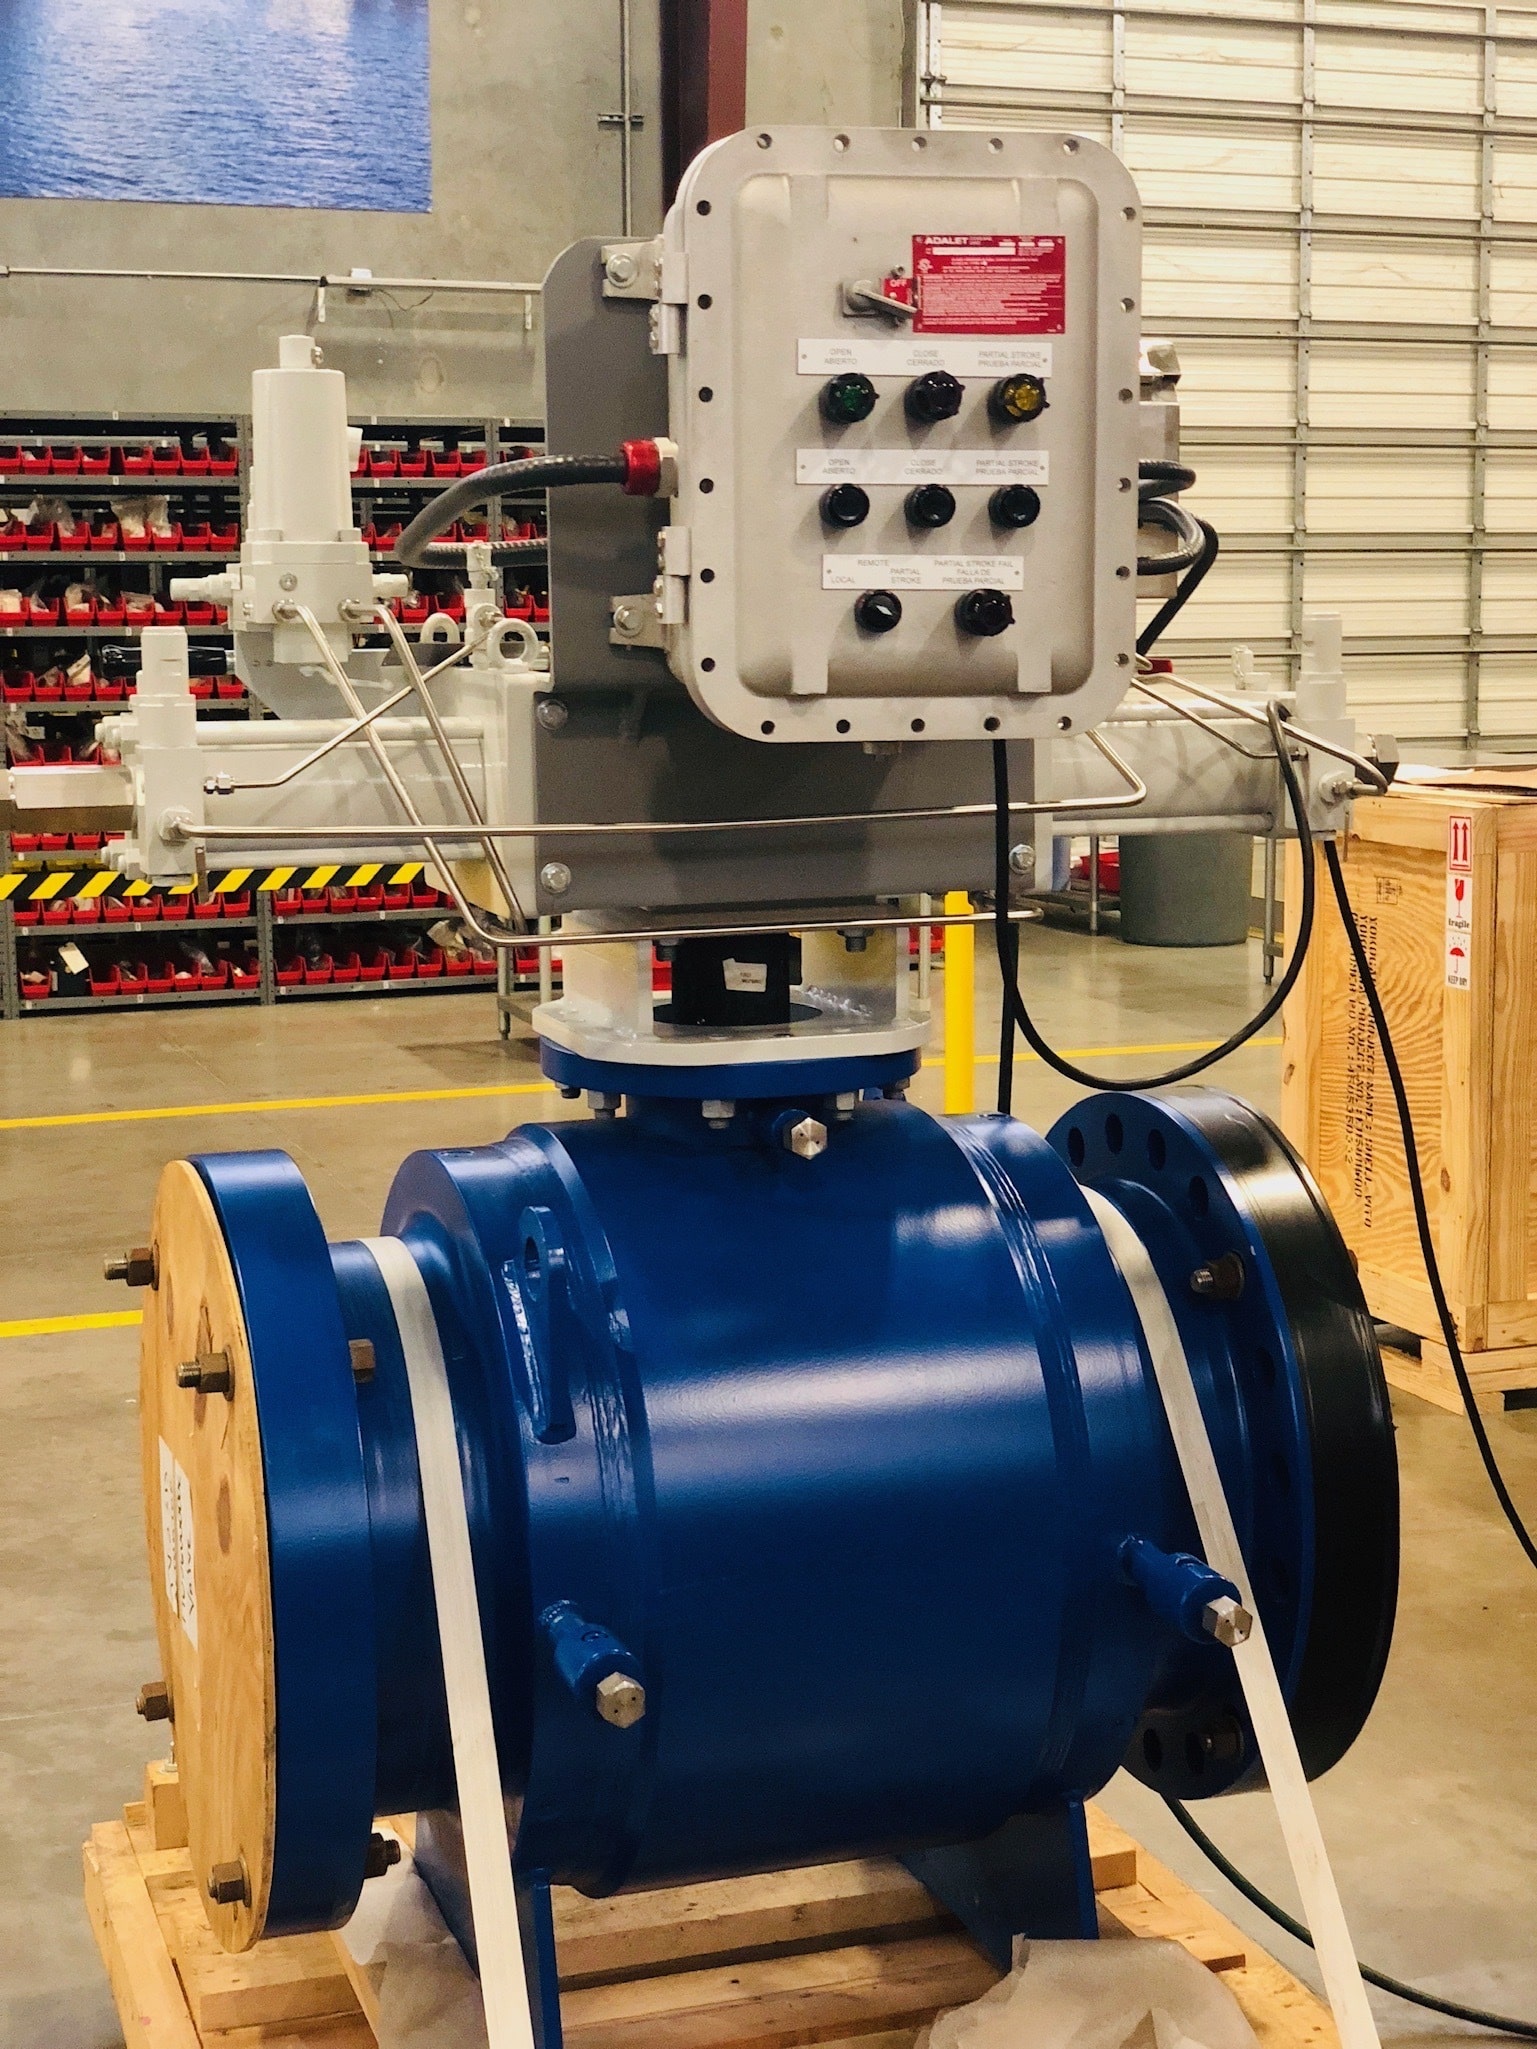 Direct gas scoth yoke actuator with api 6d fully welded ball valves